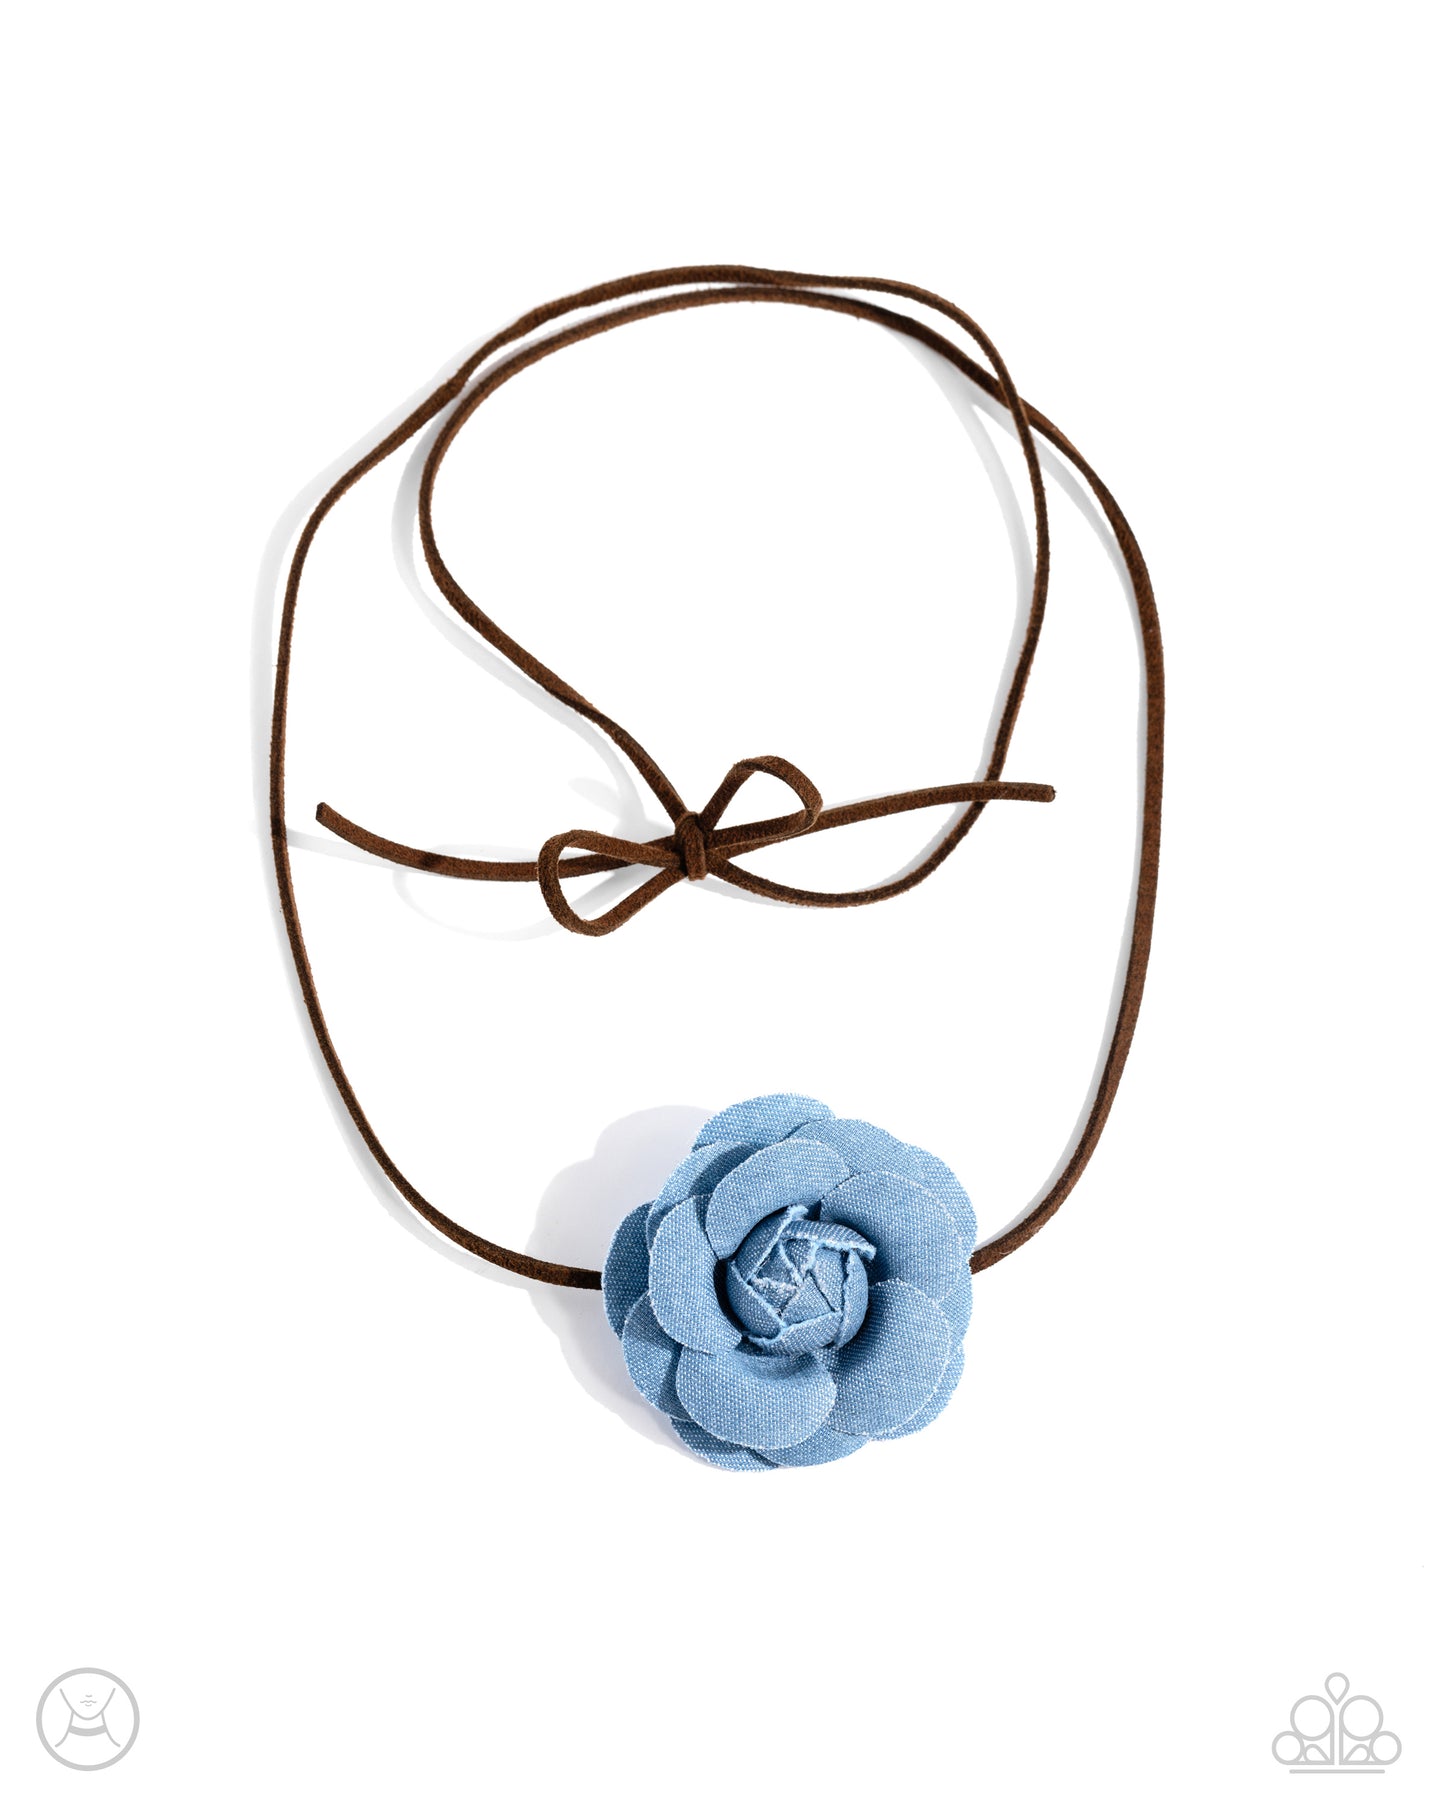 Paparazzi Accessories - Floral Folktale - Brown Choker Necklaces Featuring tactile detail, a three-dimensional, oversized denim rose slides along strips of brown suede, creating a Western floral-inspired centerpiece around the collar. Features an adjustable claspSold as one individual choker necklace. Includes one pair of matching earrings.